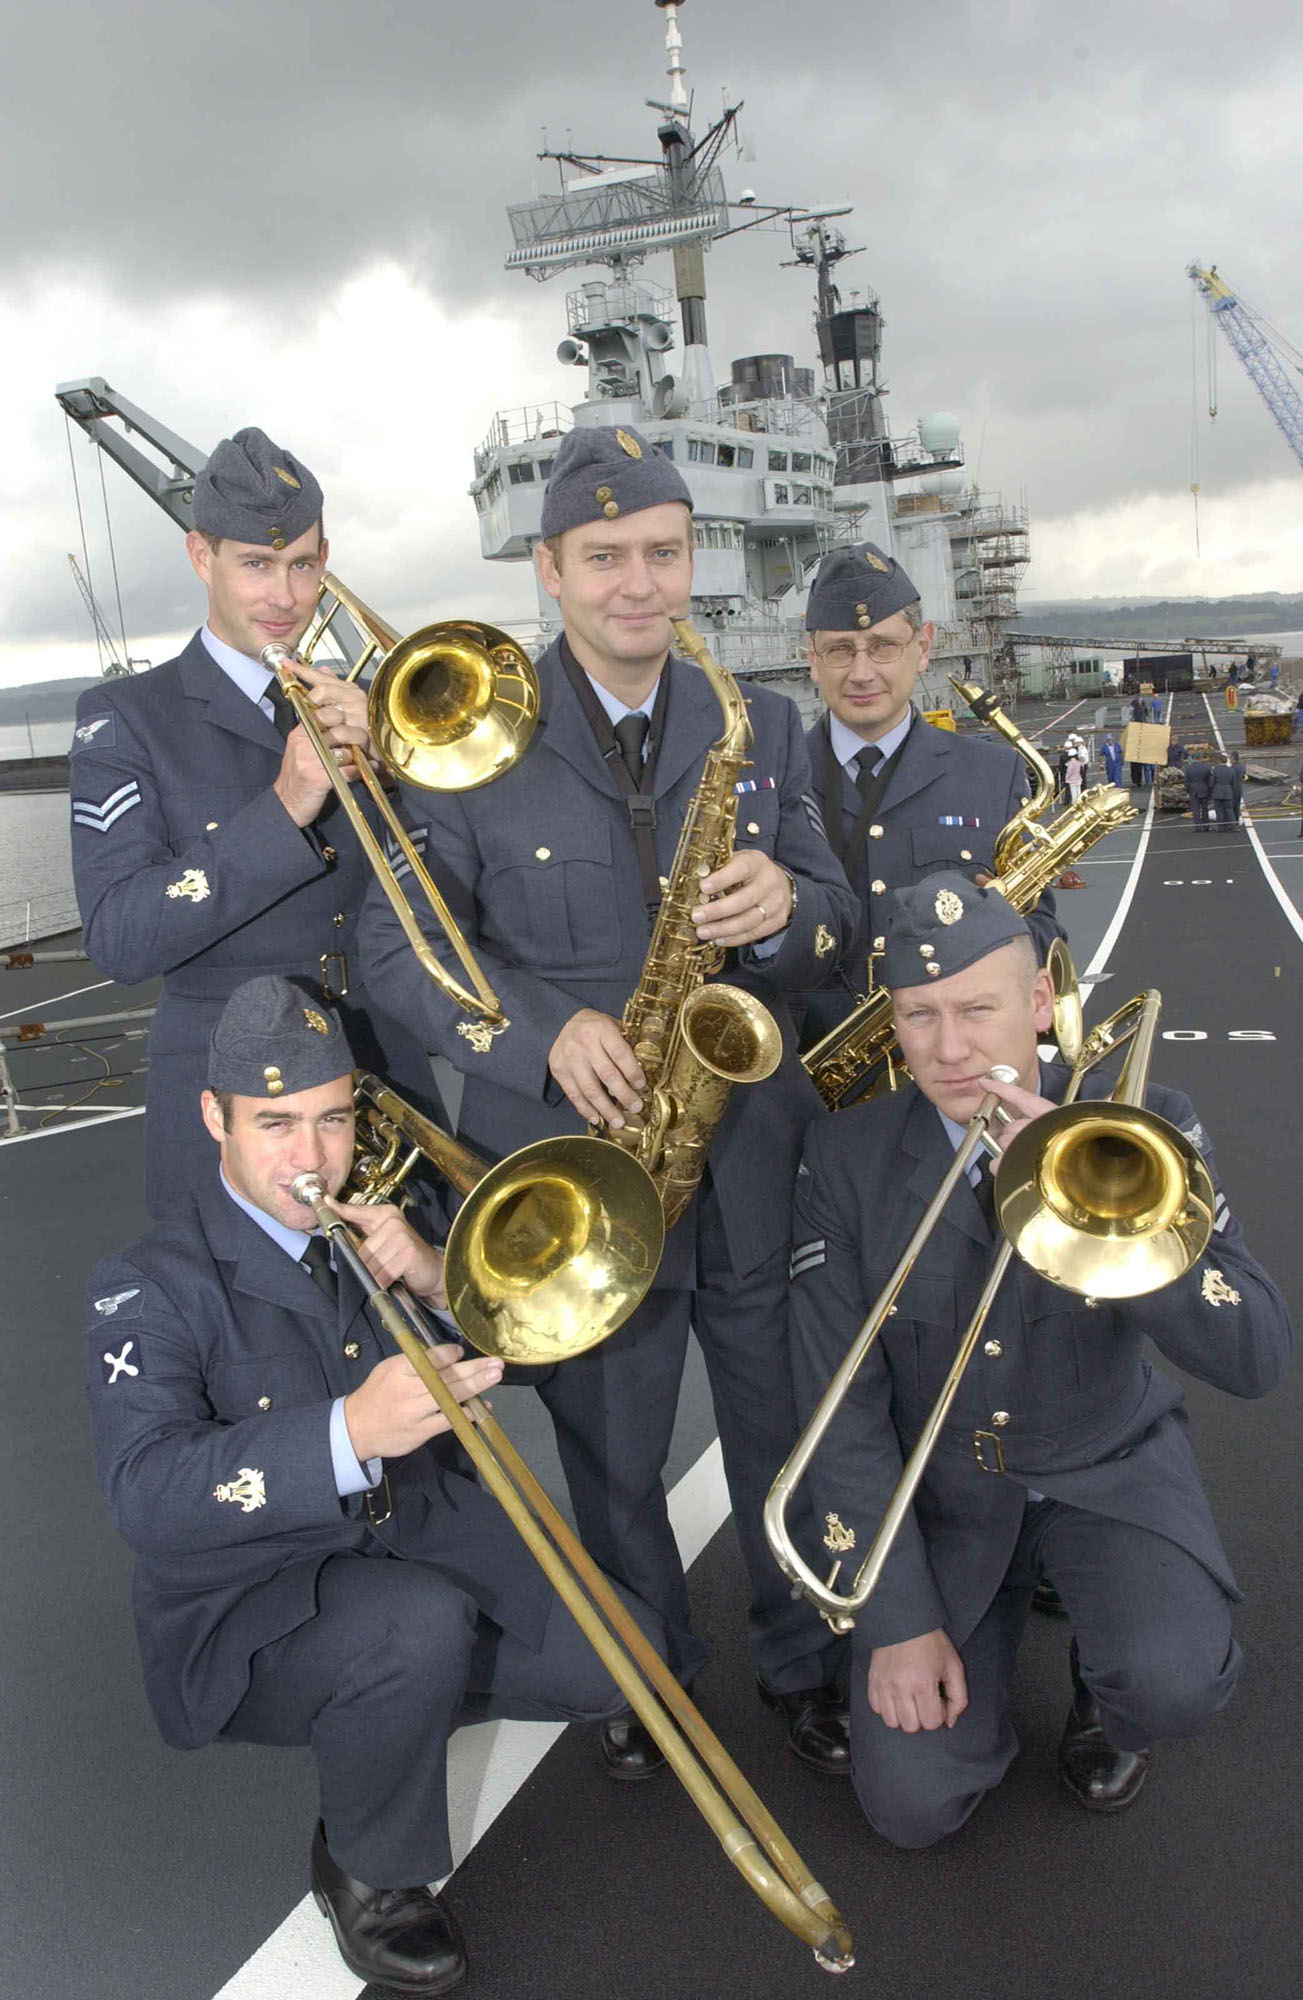 A young Corporal Piers Morrell photographed with fellow musicians of the RAF Squadronaires.